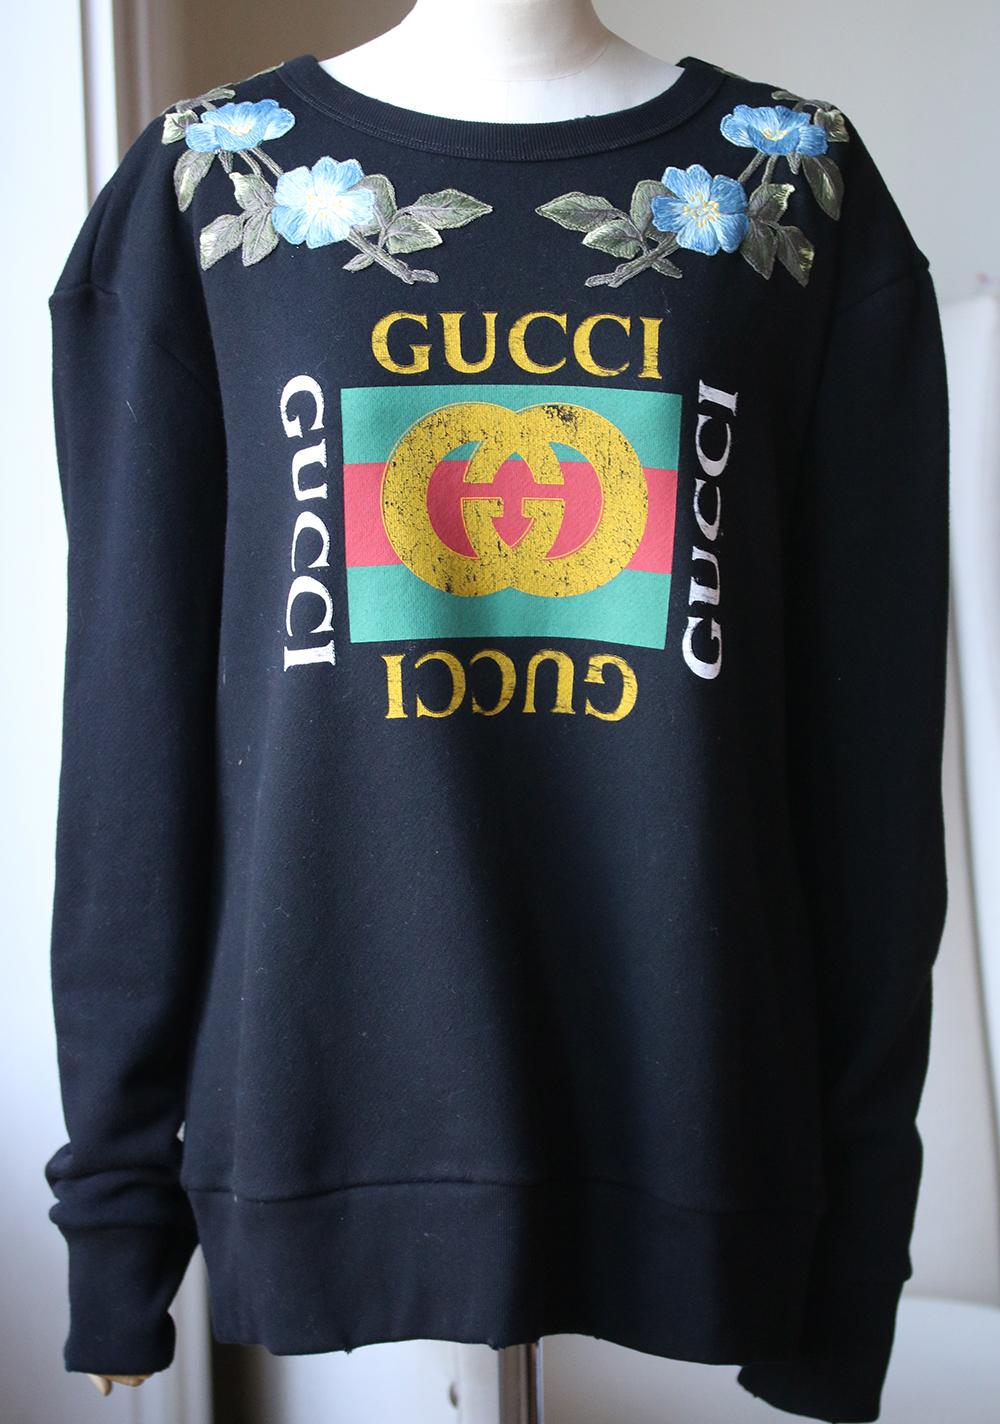 This black and multi-coloured Gucci cotton 'Loved' GG floral sweatshirt has us punch drunk for its flawless Italian craftsmanship and multi-coloured 'Gucci Print' logo print at the front. This jumper has been crafted from cotton and features a crew